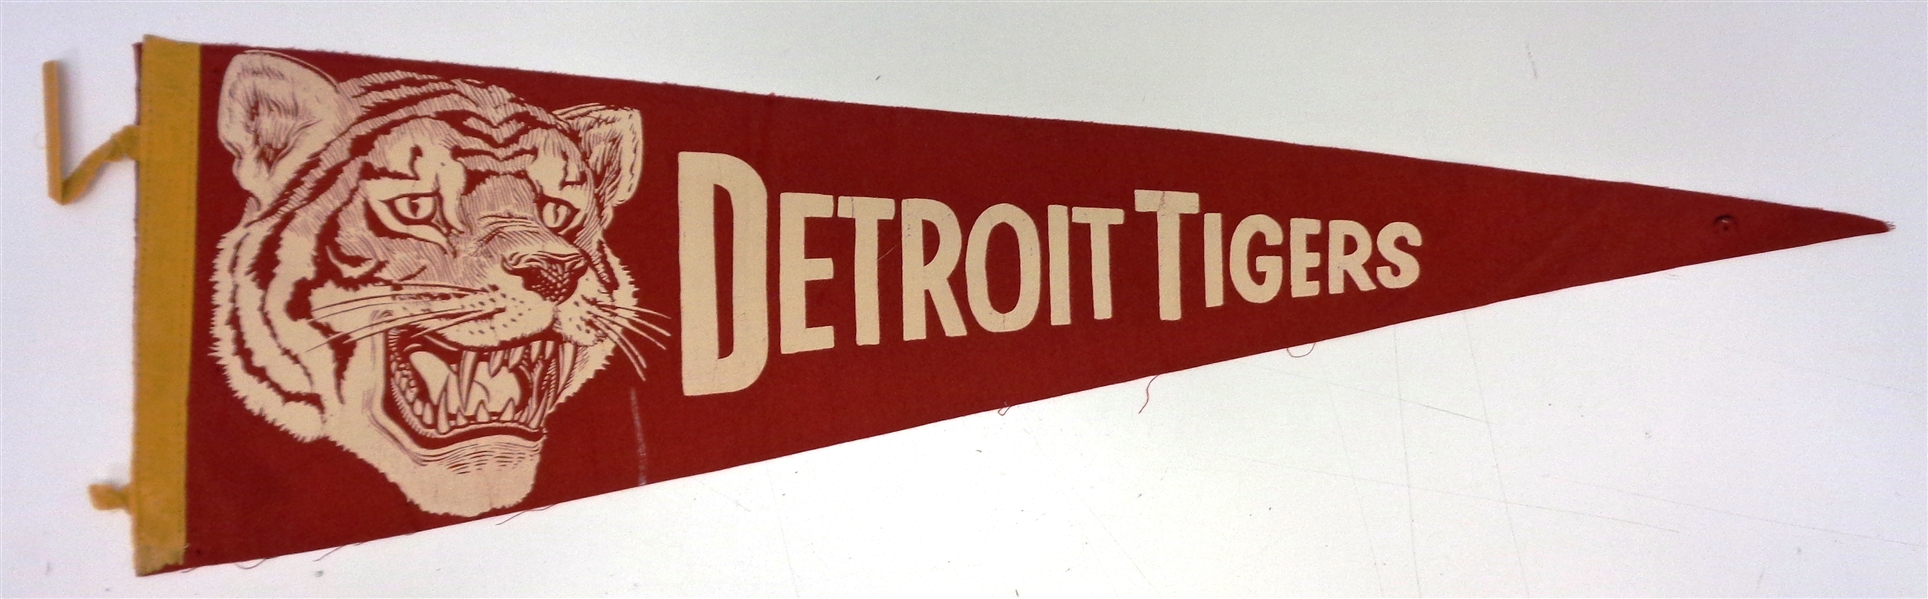 1950s Detroit Tigers 3/4 Size Red Pennant